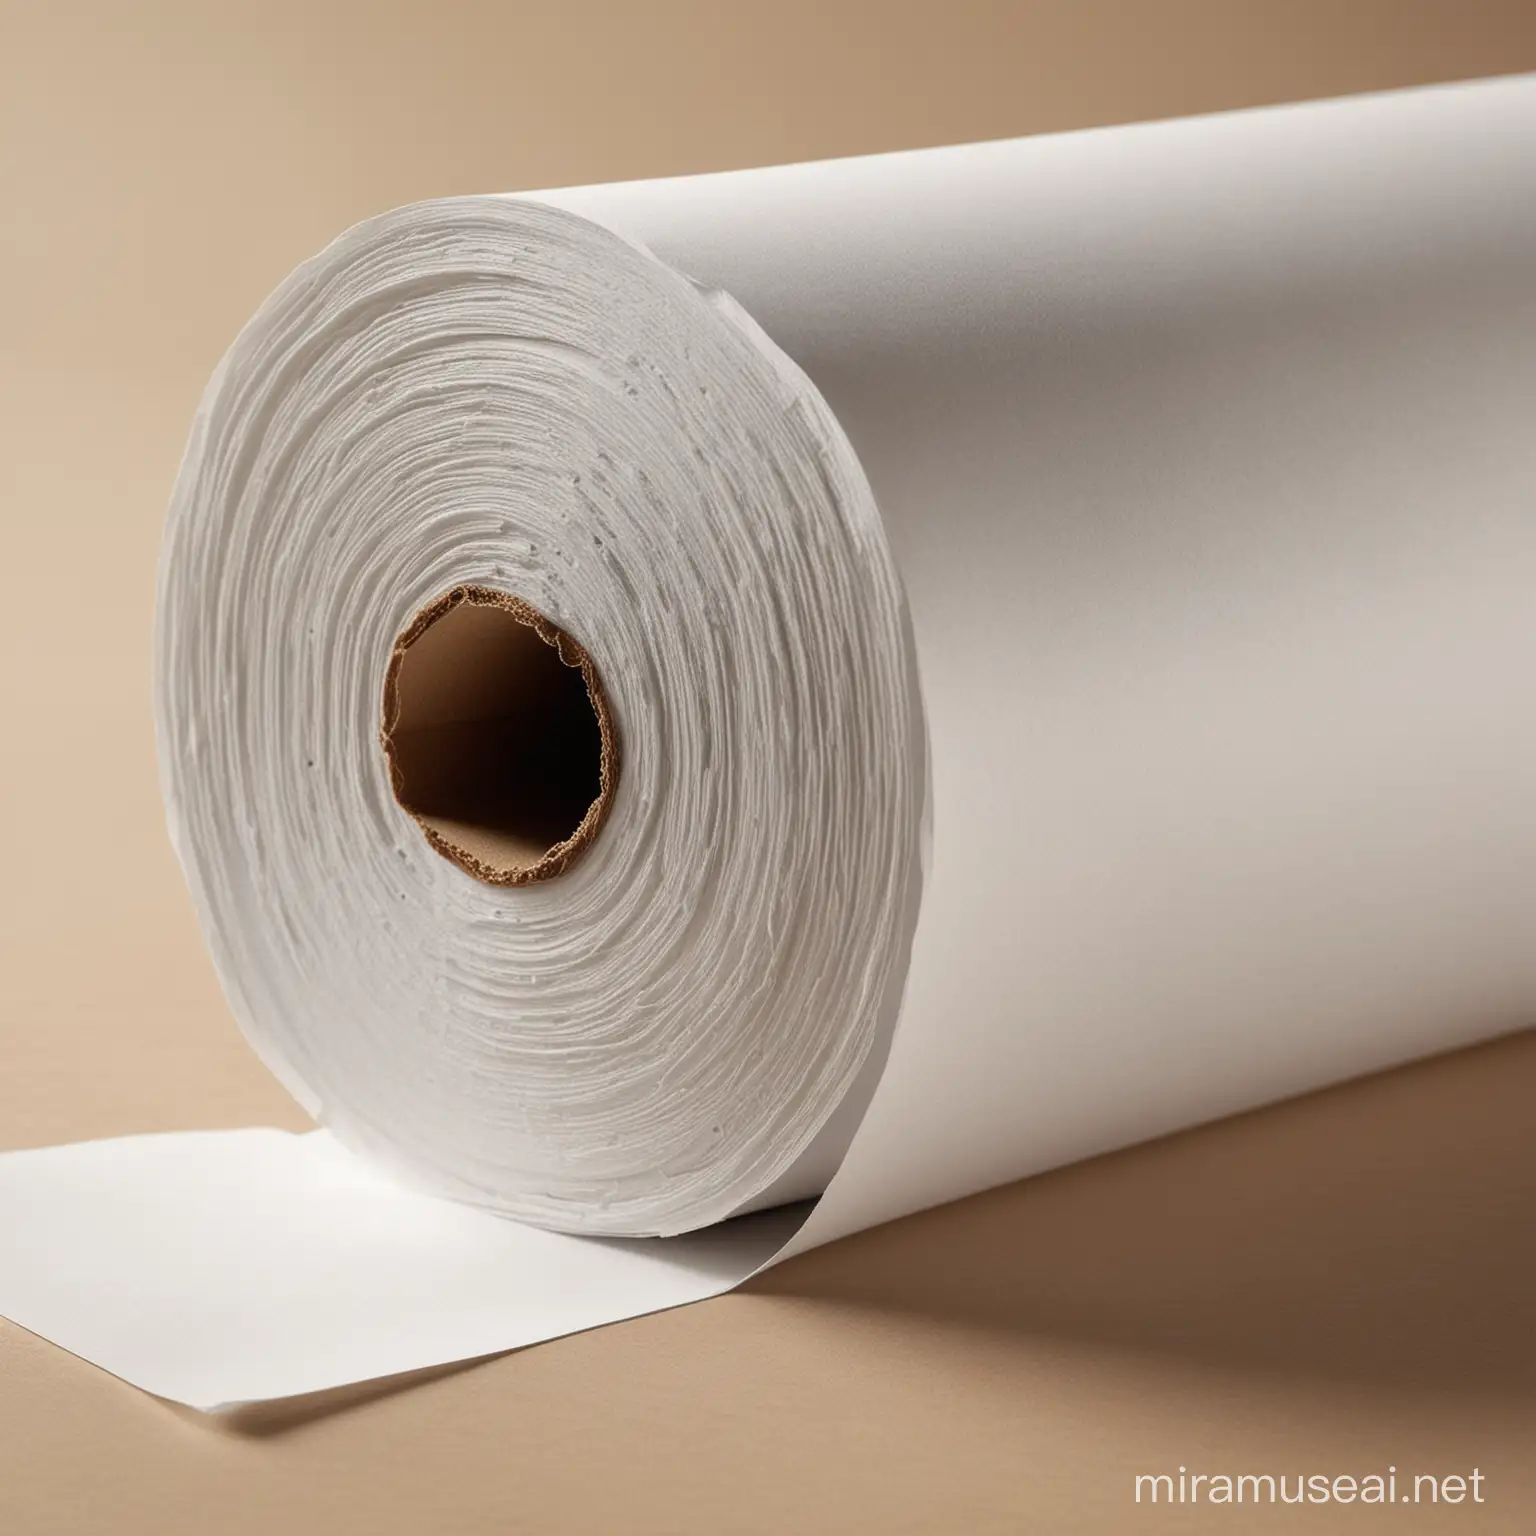 Large Roll of Neatly Wound Paper Industrial Paper Roll Image